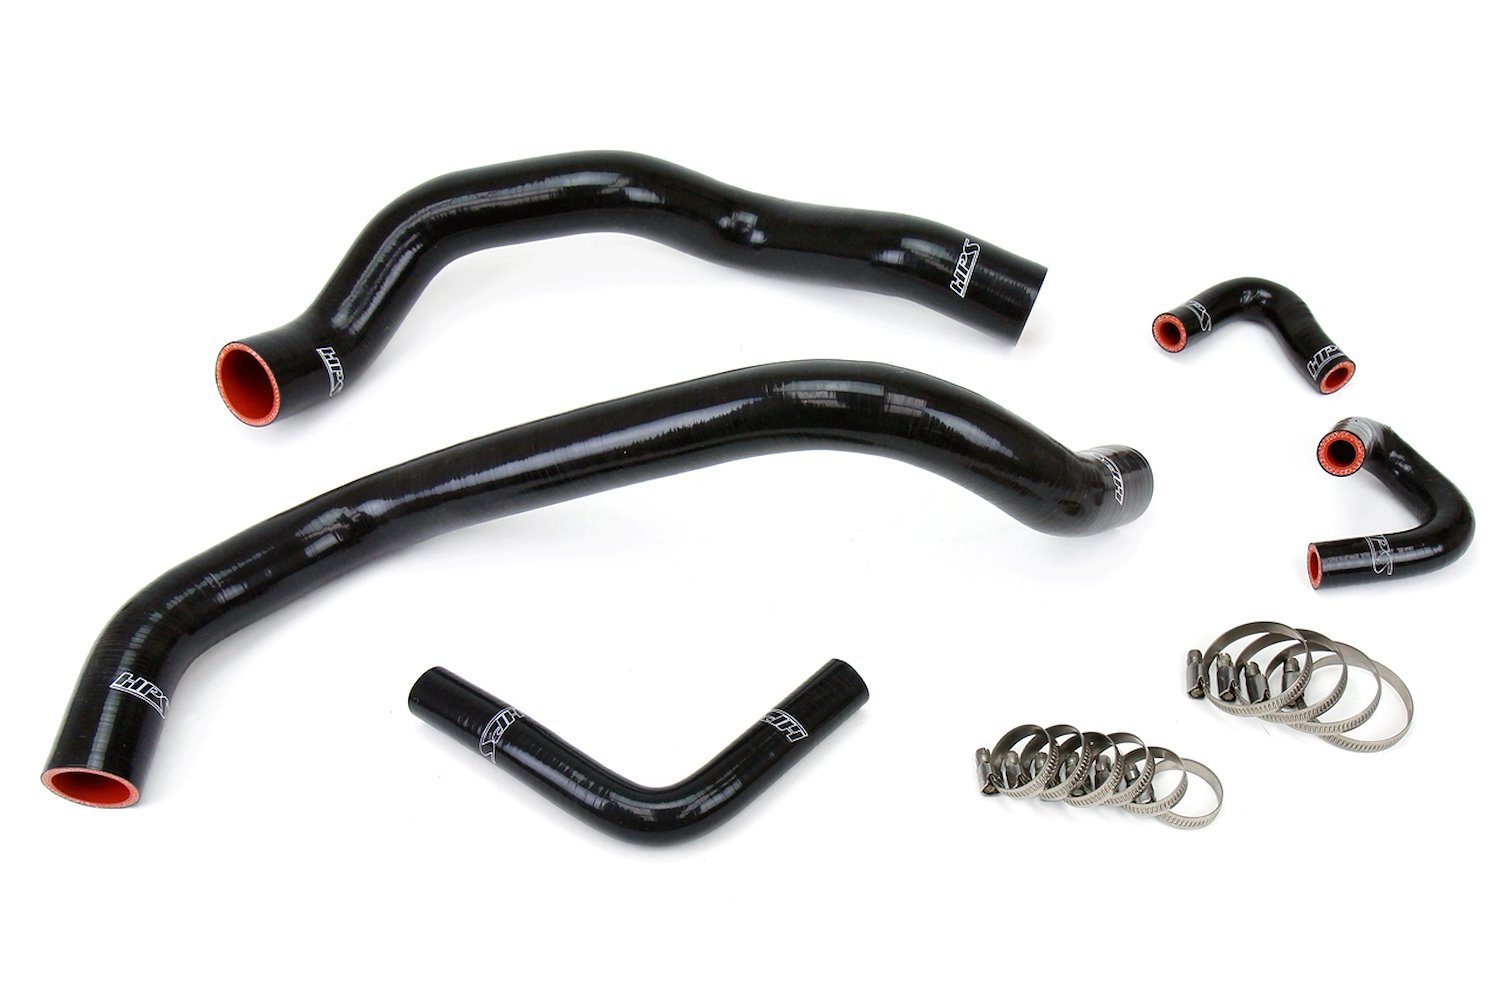 57-1401-BLK Coolant Hose Kit, High-Temp 3-Ply Reinforced Silicone, Replace Rubber Radiator Heater Coolant Hoses